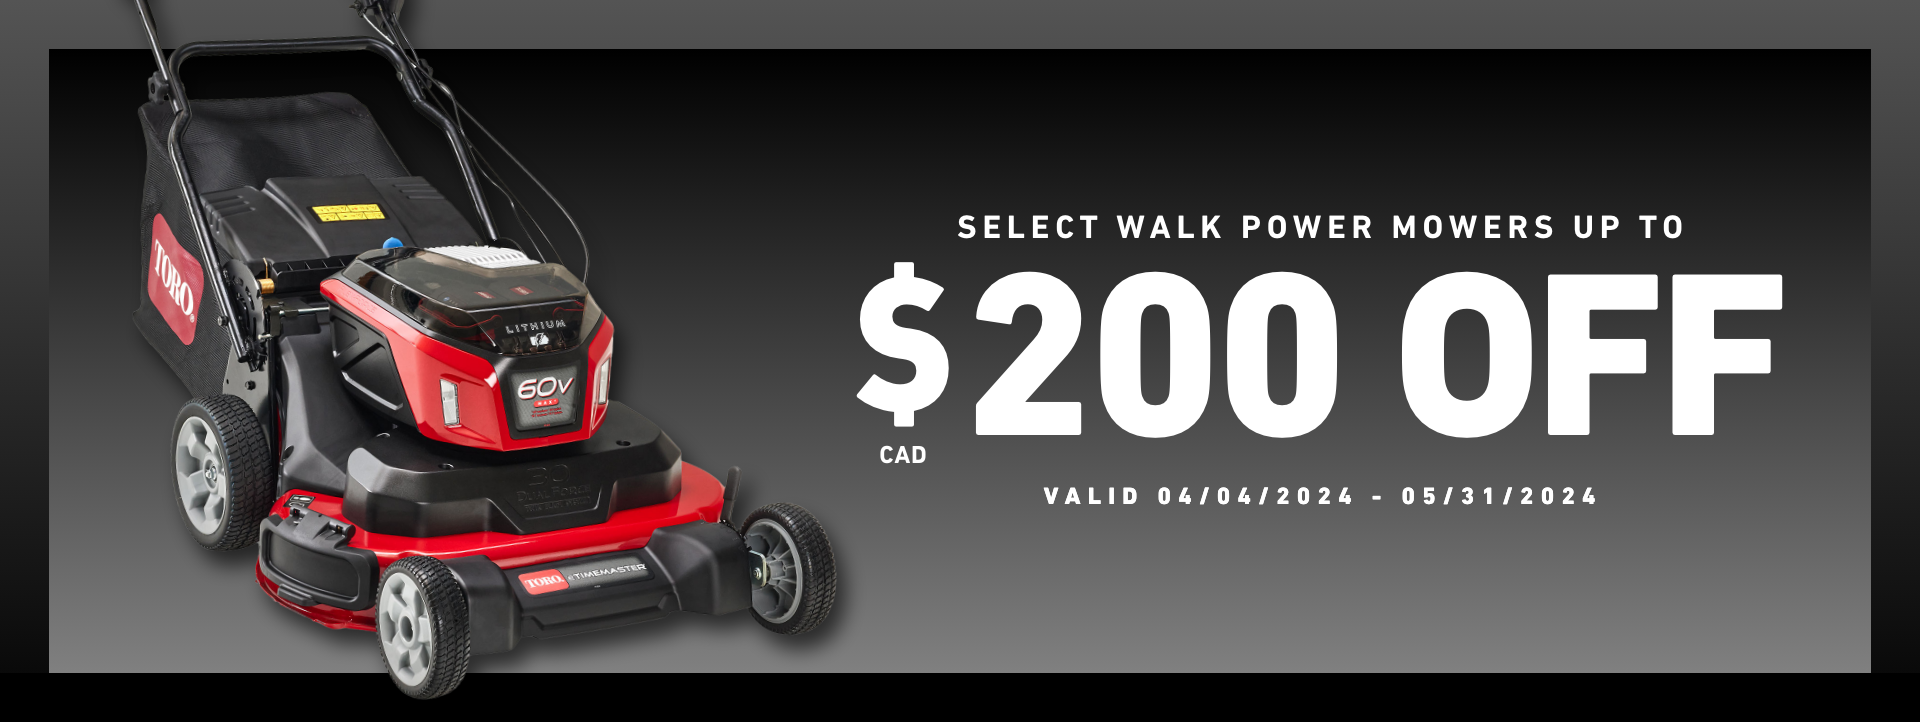 Toro Spring Sale - Save up to $200 off select walk power mowers